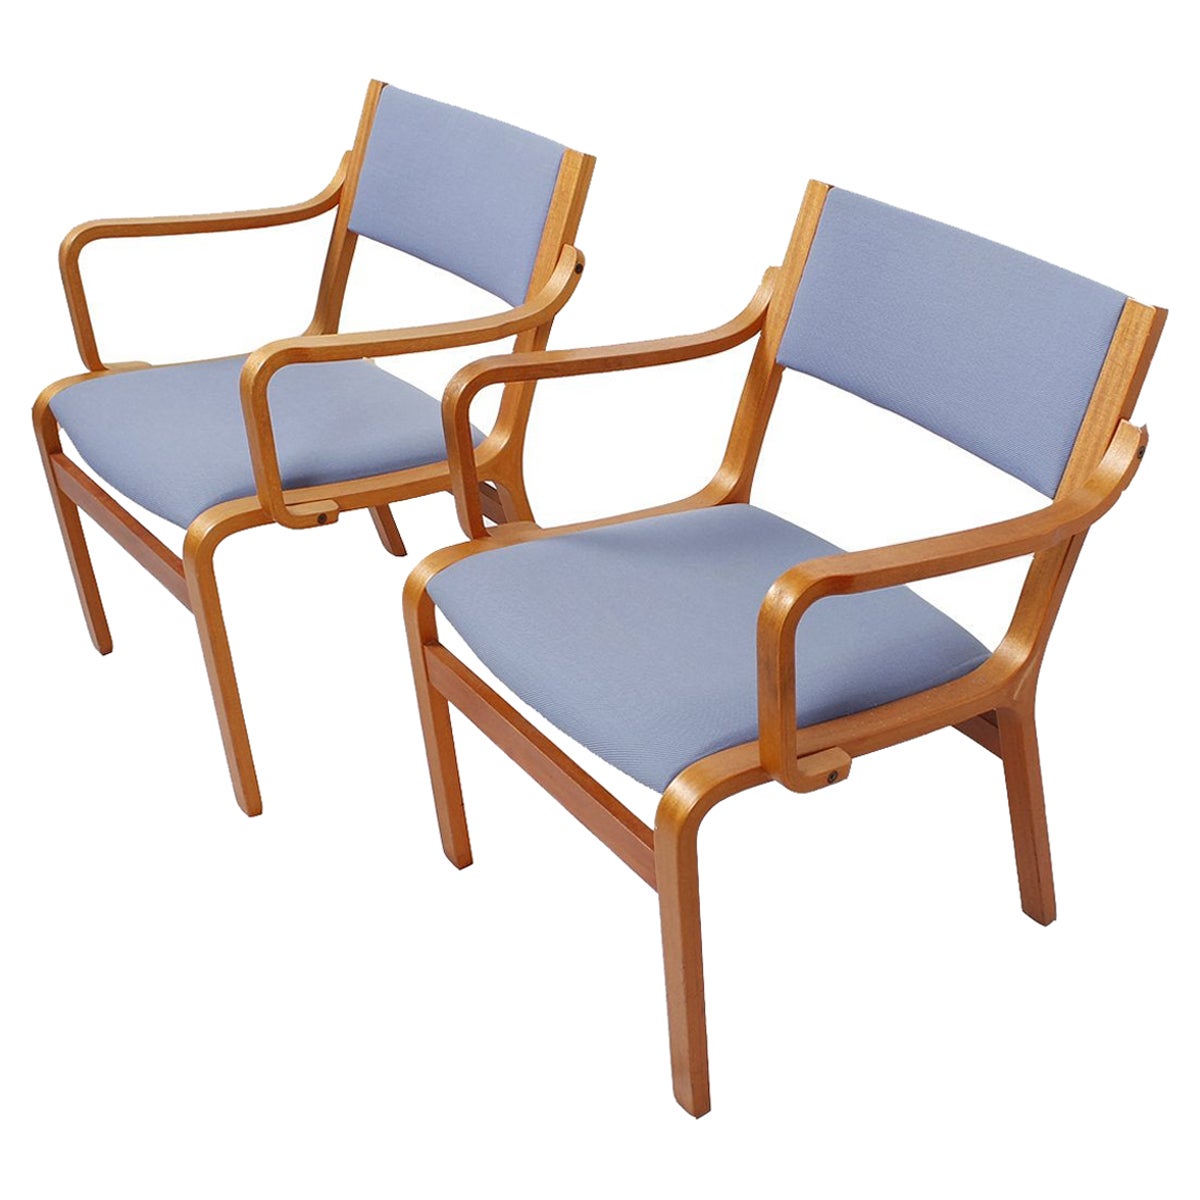 Pair of Bentwood Arm Chairs with Blue Upholstery from Danish Embassy